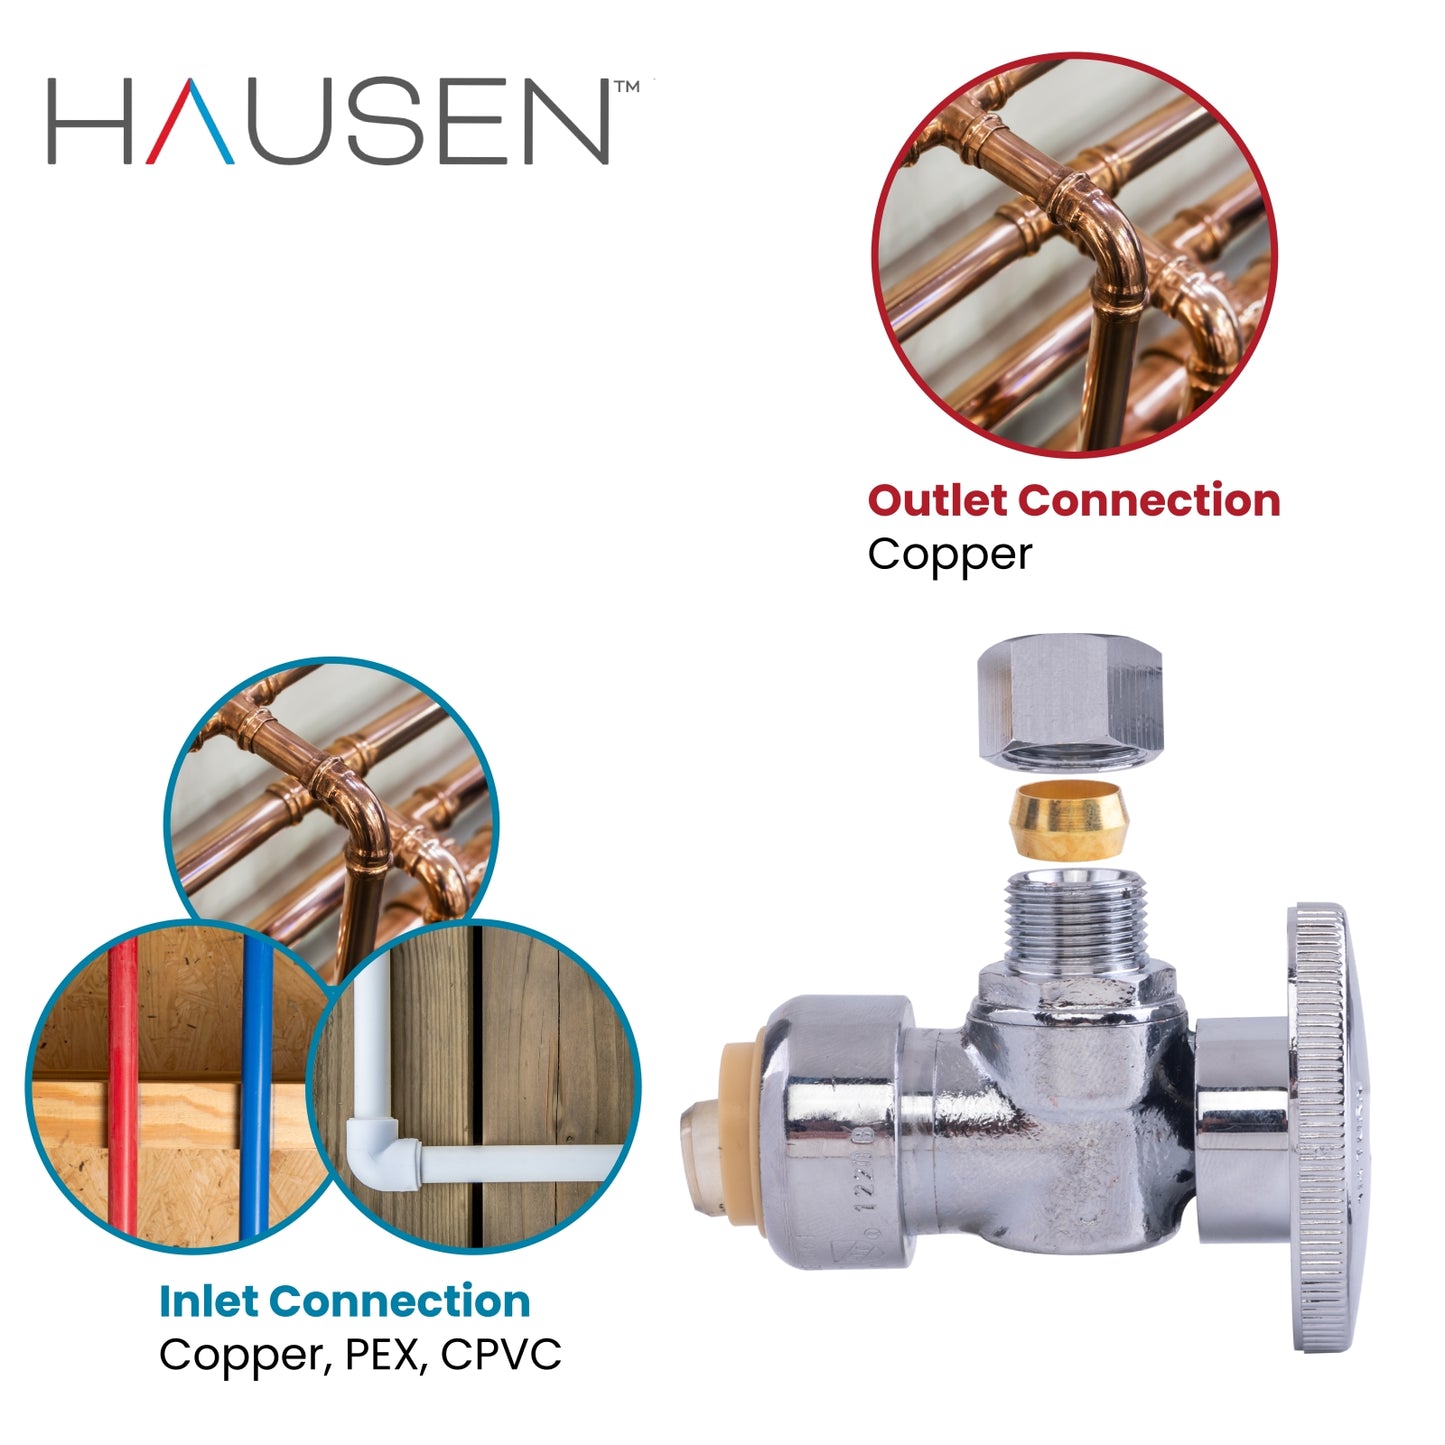 Hausen 1/2-inch Nominal Push Connect Inlet x 3/8-inch O.D. Compression Outlet 1/4-Turn Angle Water Stop; Lead-Free Forged Brass; Chrome-Plated; Compatible with Copper, CPVC and PEX Piping, 10-Pack